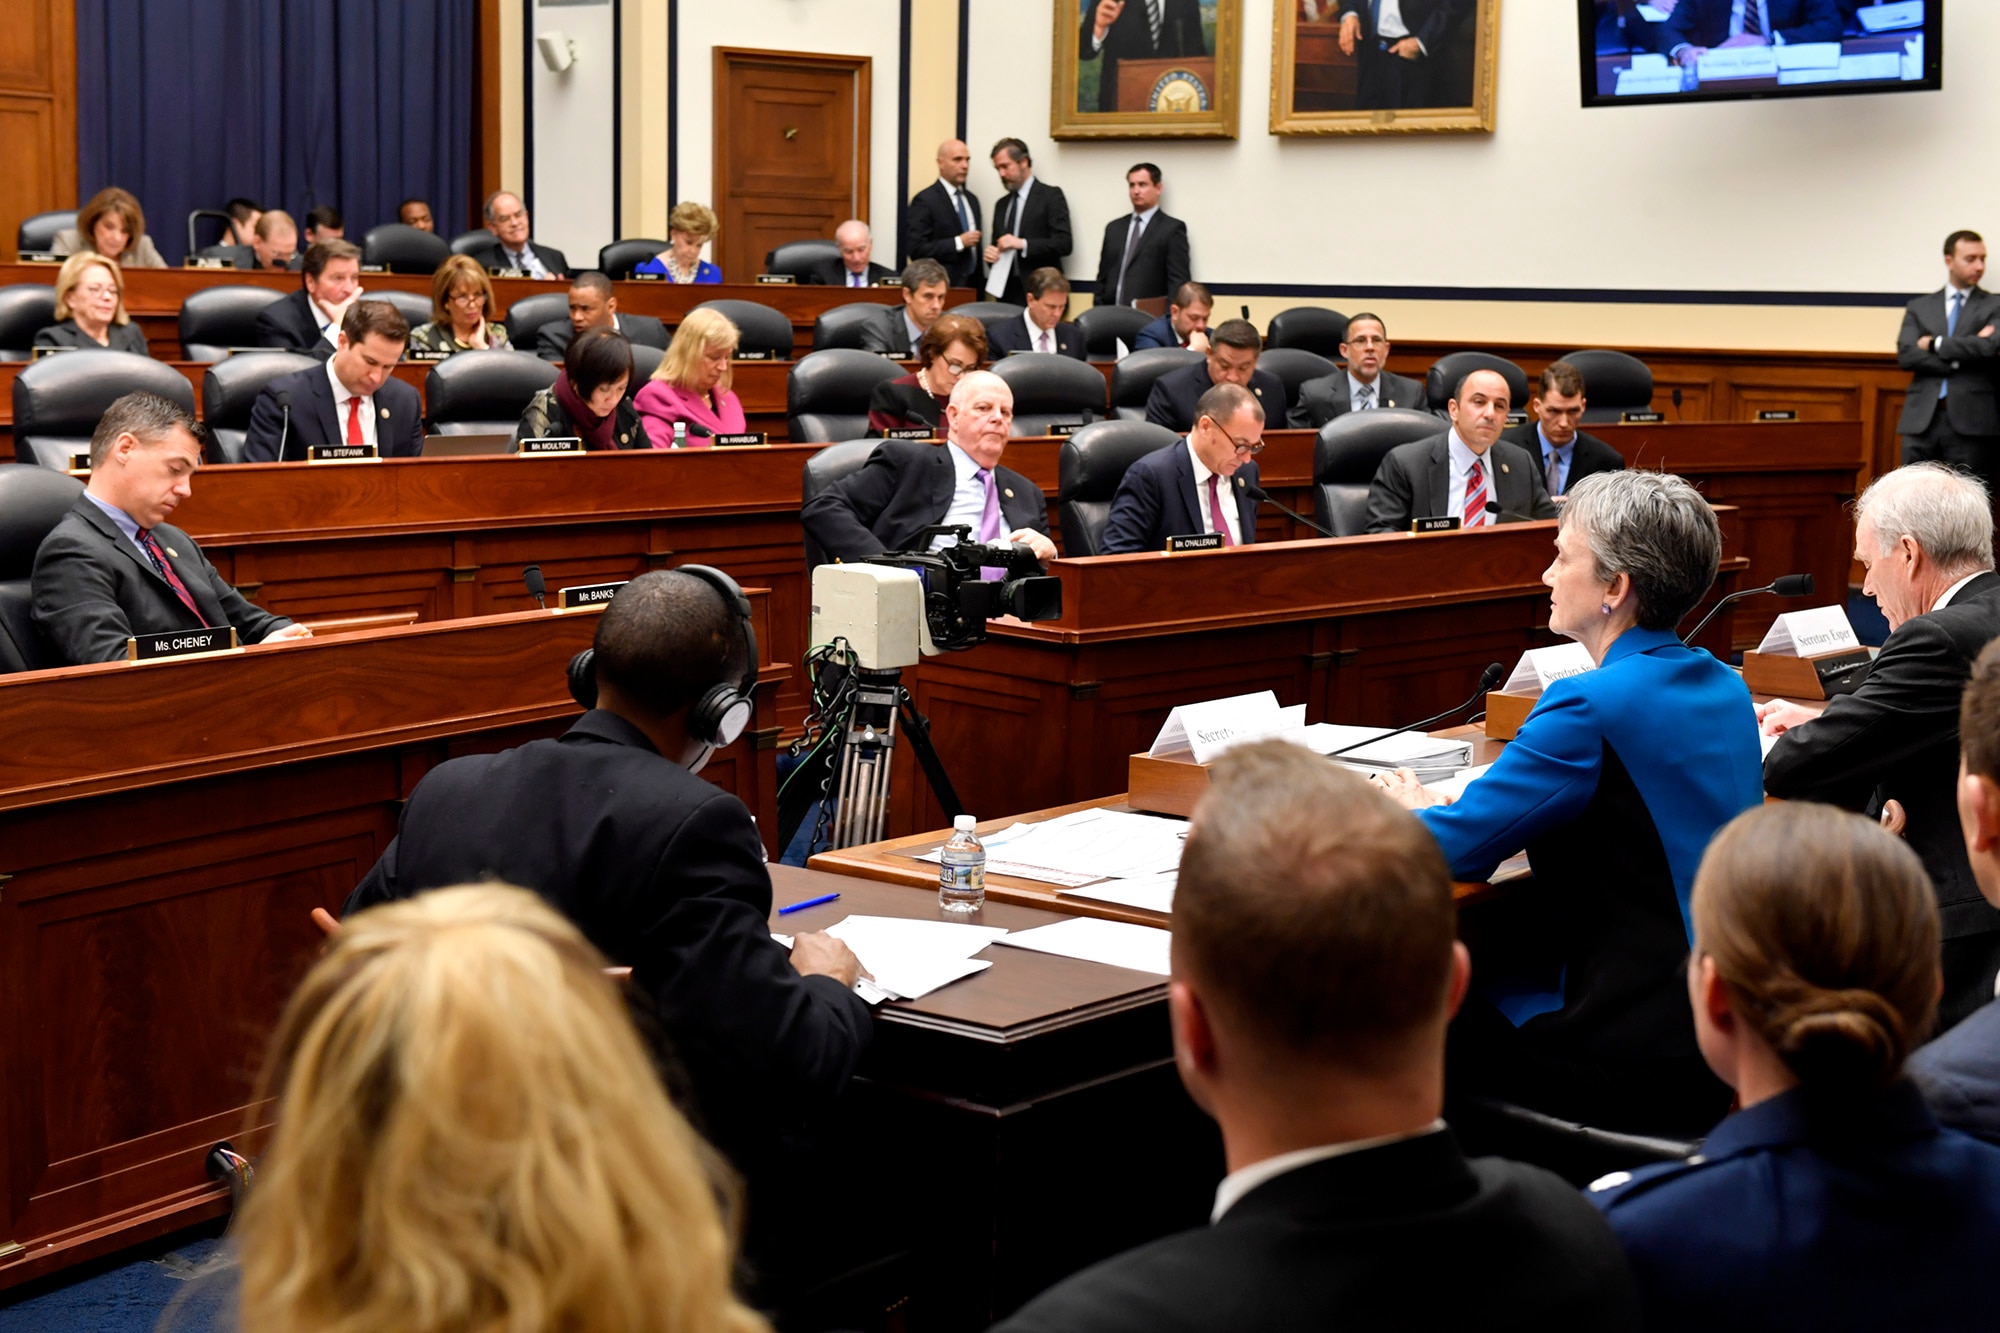 Secretary of the Air Force Heather Wilson testifies before the U.S. House of Representatives Armed Services Committee about the Air Force’s fiscal year 2019 budget March 20, 2018, in Washington, D.C. (U.S. Air Force photo by Wayne Clark)